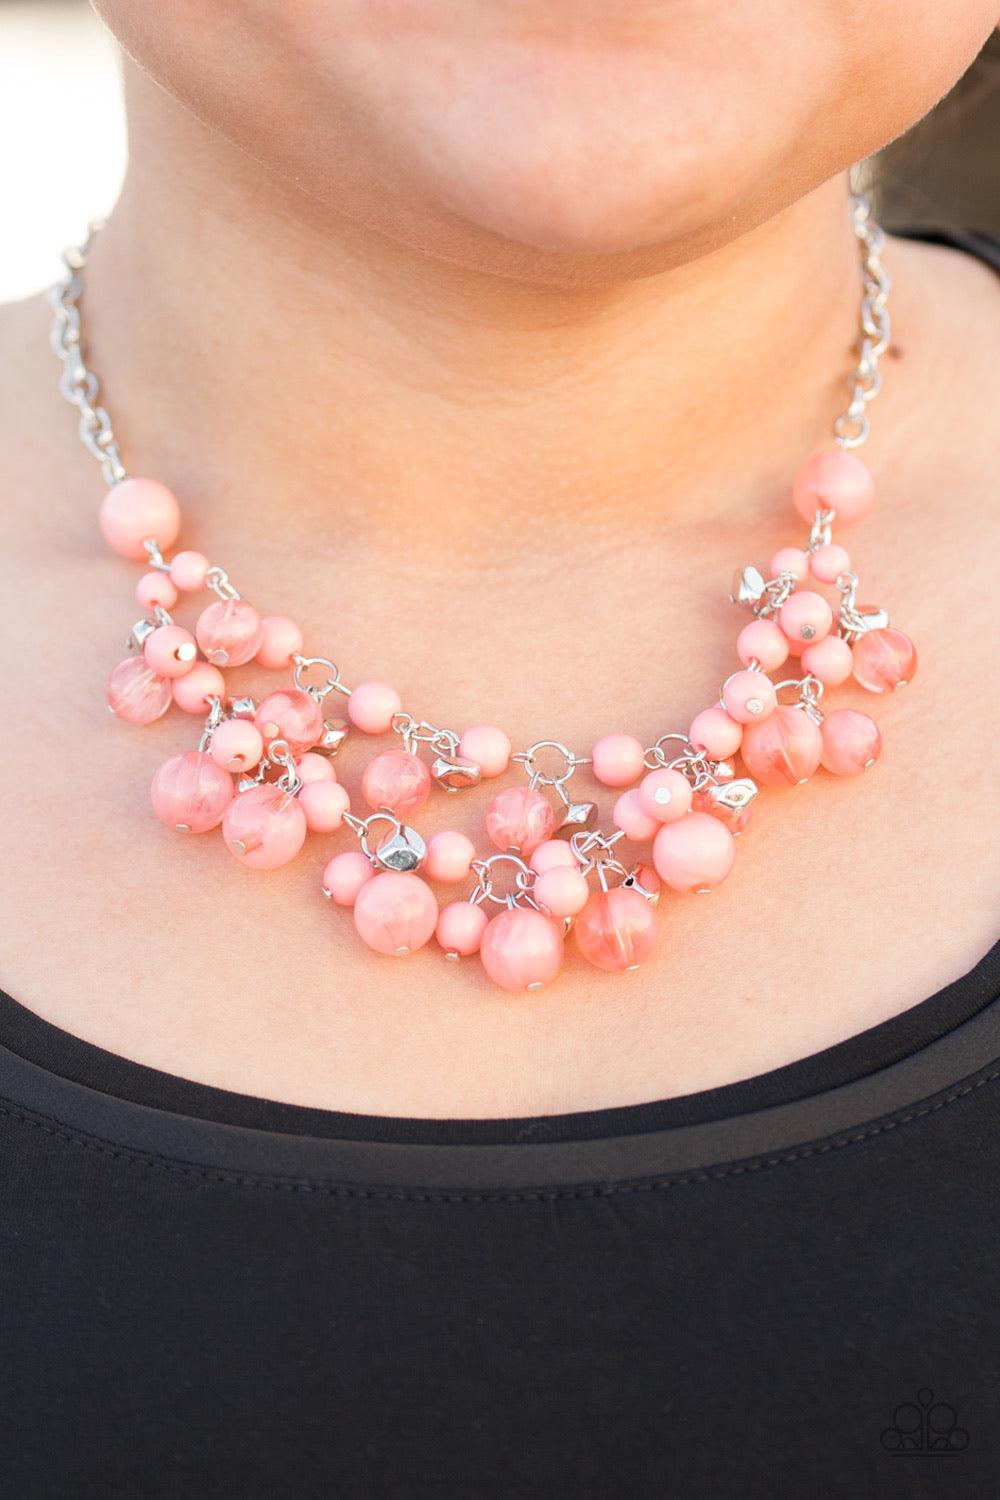 Paparazzi Accessories Spring Bride - Orange Polished and cloudy coral beads swing from two shimmery silver chains, creating a colorful fringe below the collar. Faceted silver beads trickle between the colorful accents, adding depth and shimmer to the whim